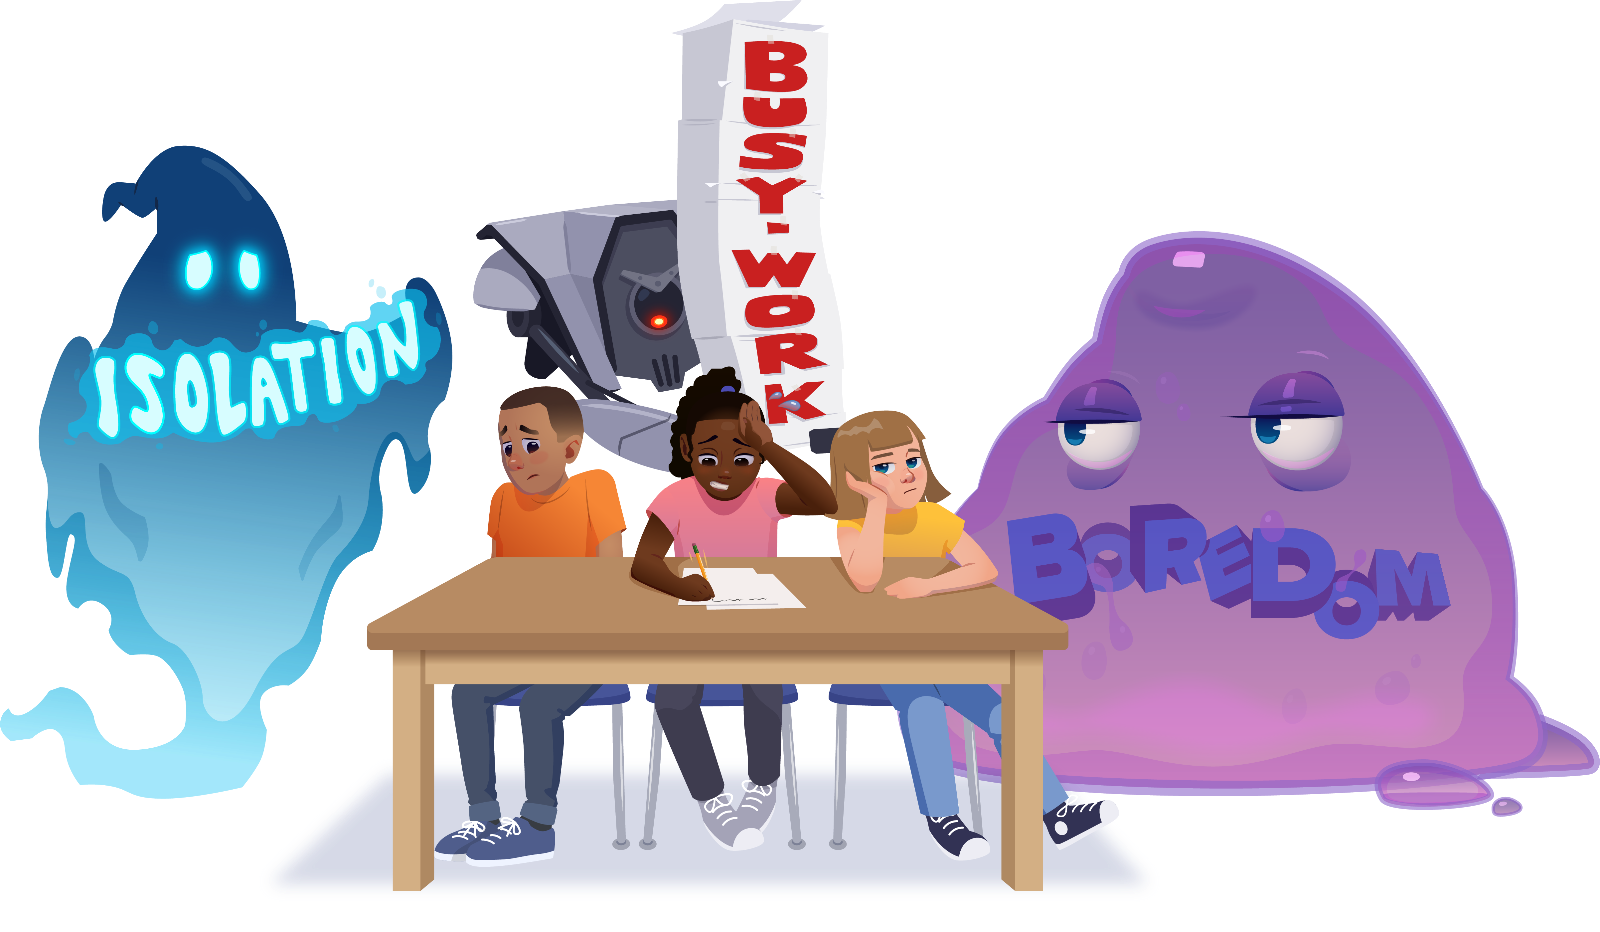 Animated image of students at a desk with monsters looming behind them showing the dangers of isolation, busy work, and boredom.